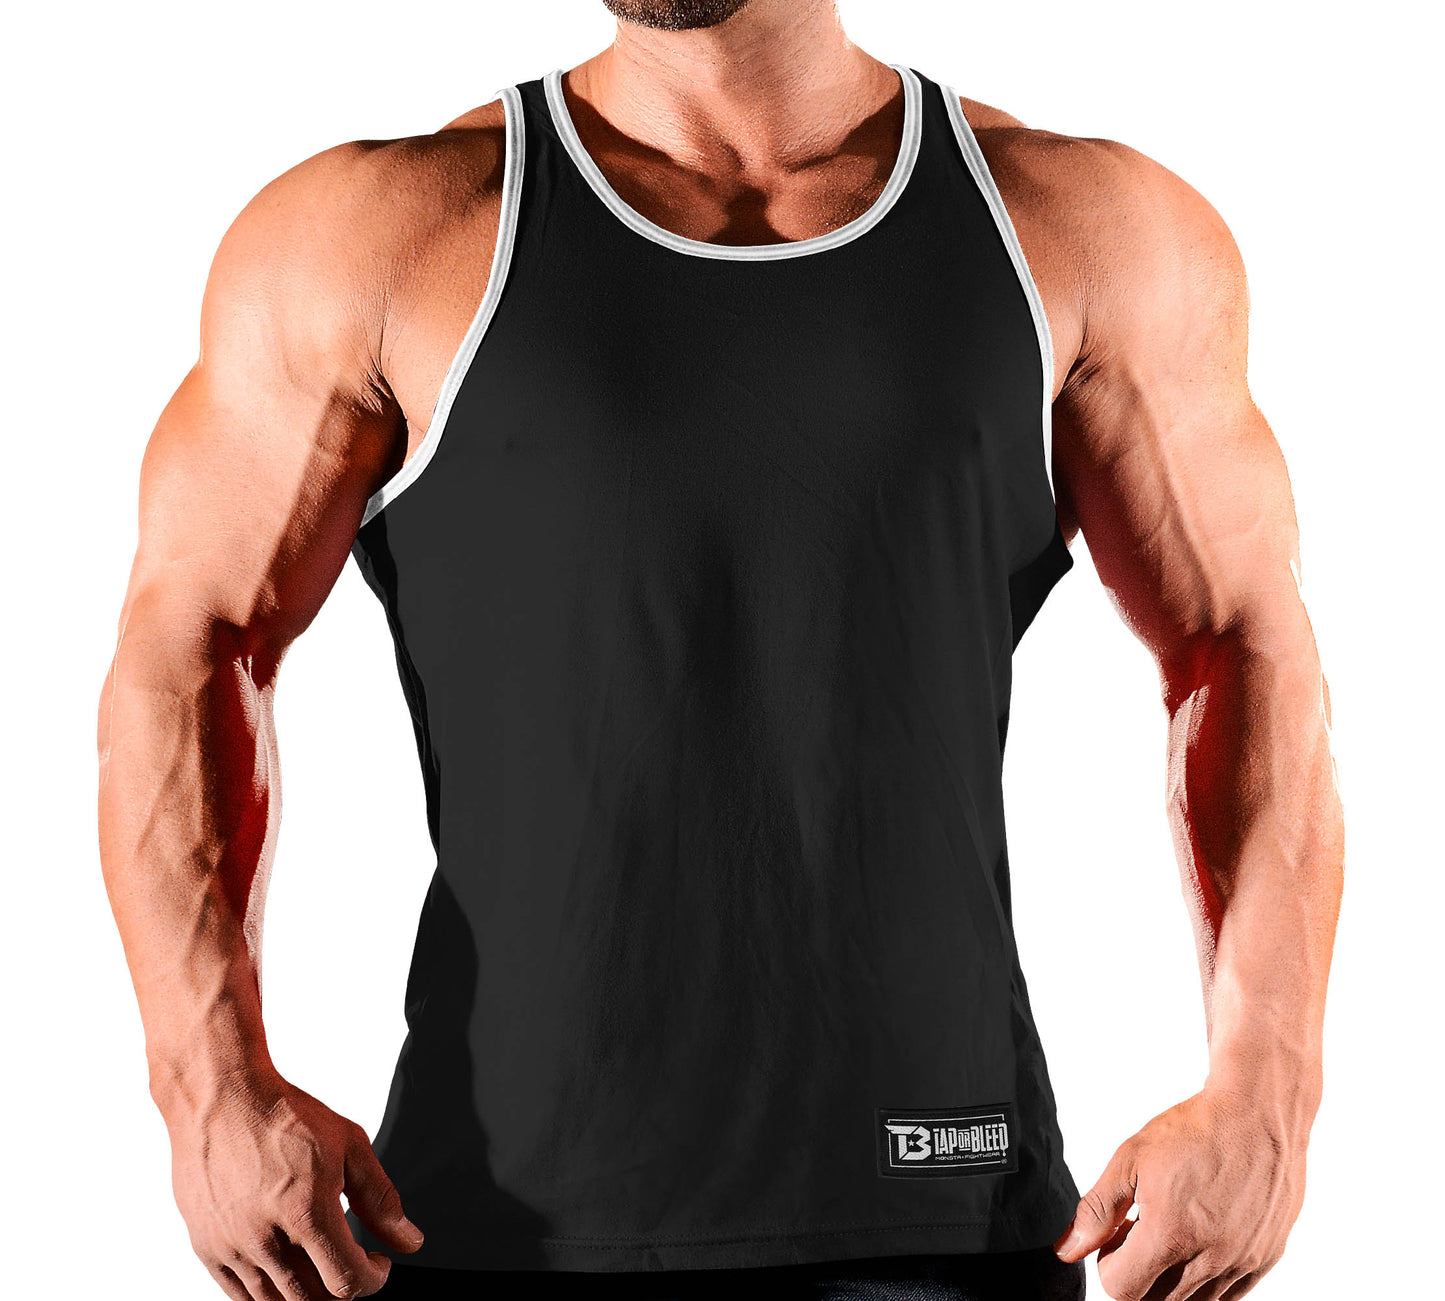 Elite Series: Tap or Bleed Workout Clothes-000: Black Body